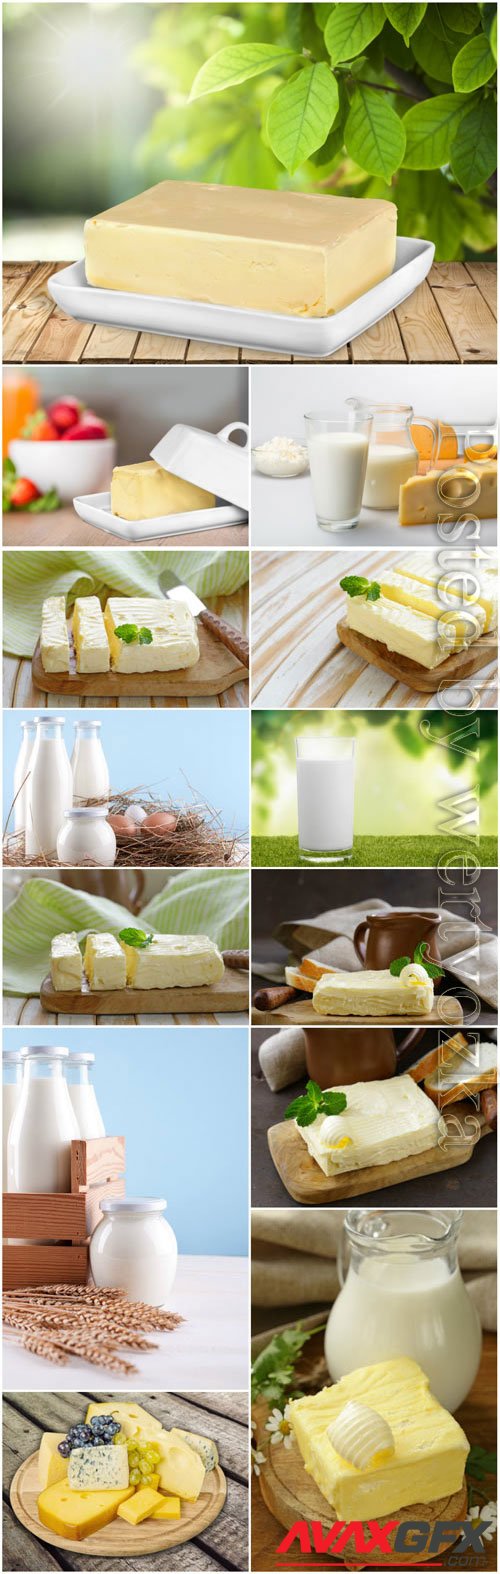 Butter and cheese, milk stock photo